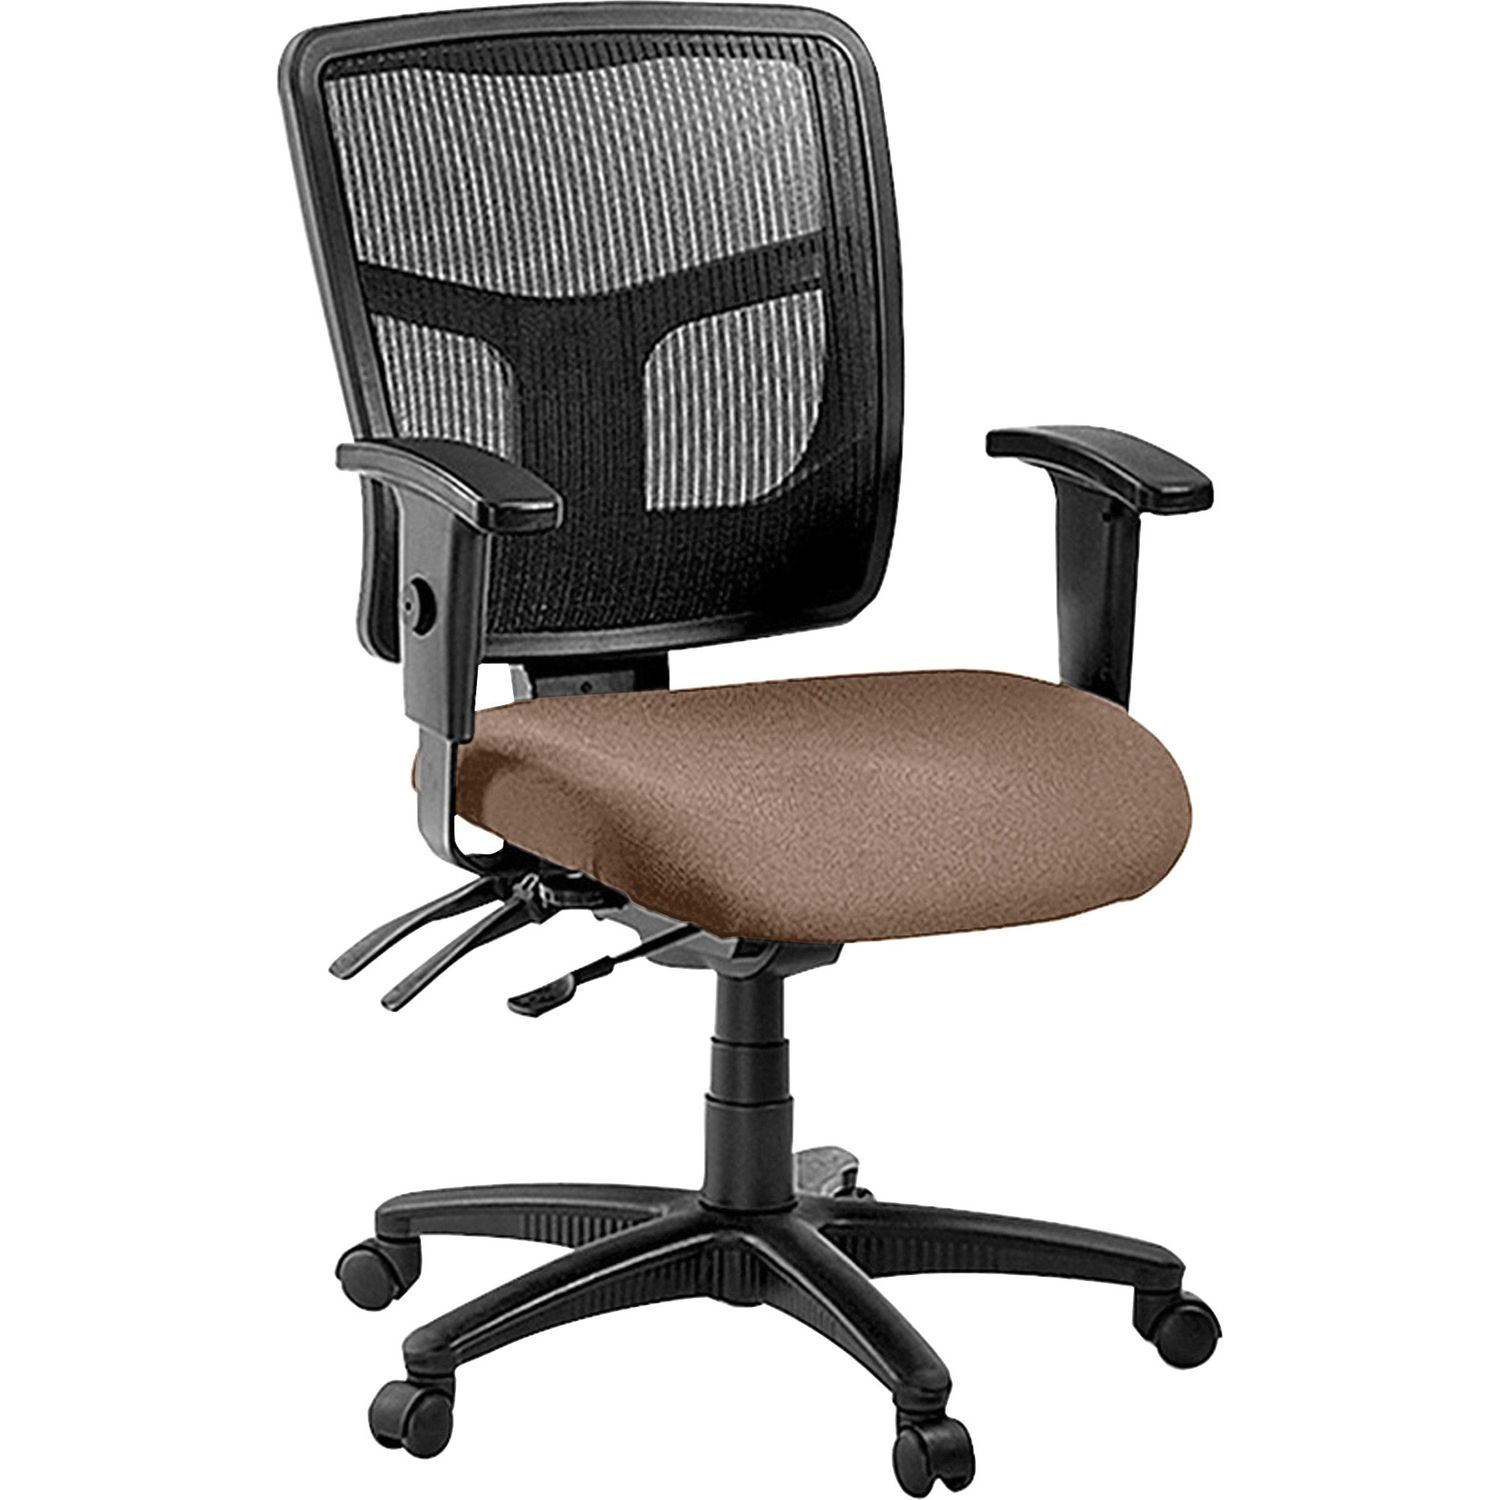 ErgoMesh Series Managerial Mid-Back Chair Malted Fabric Seat, Black Back, Black Frame, 5-star Base, 1 Each